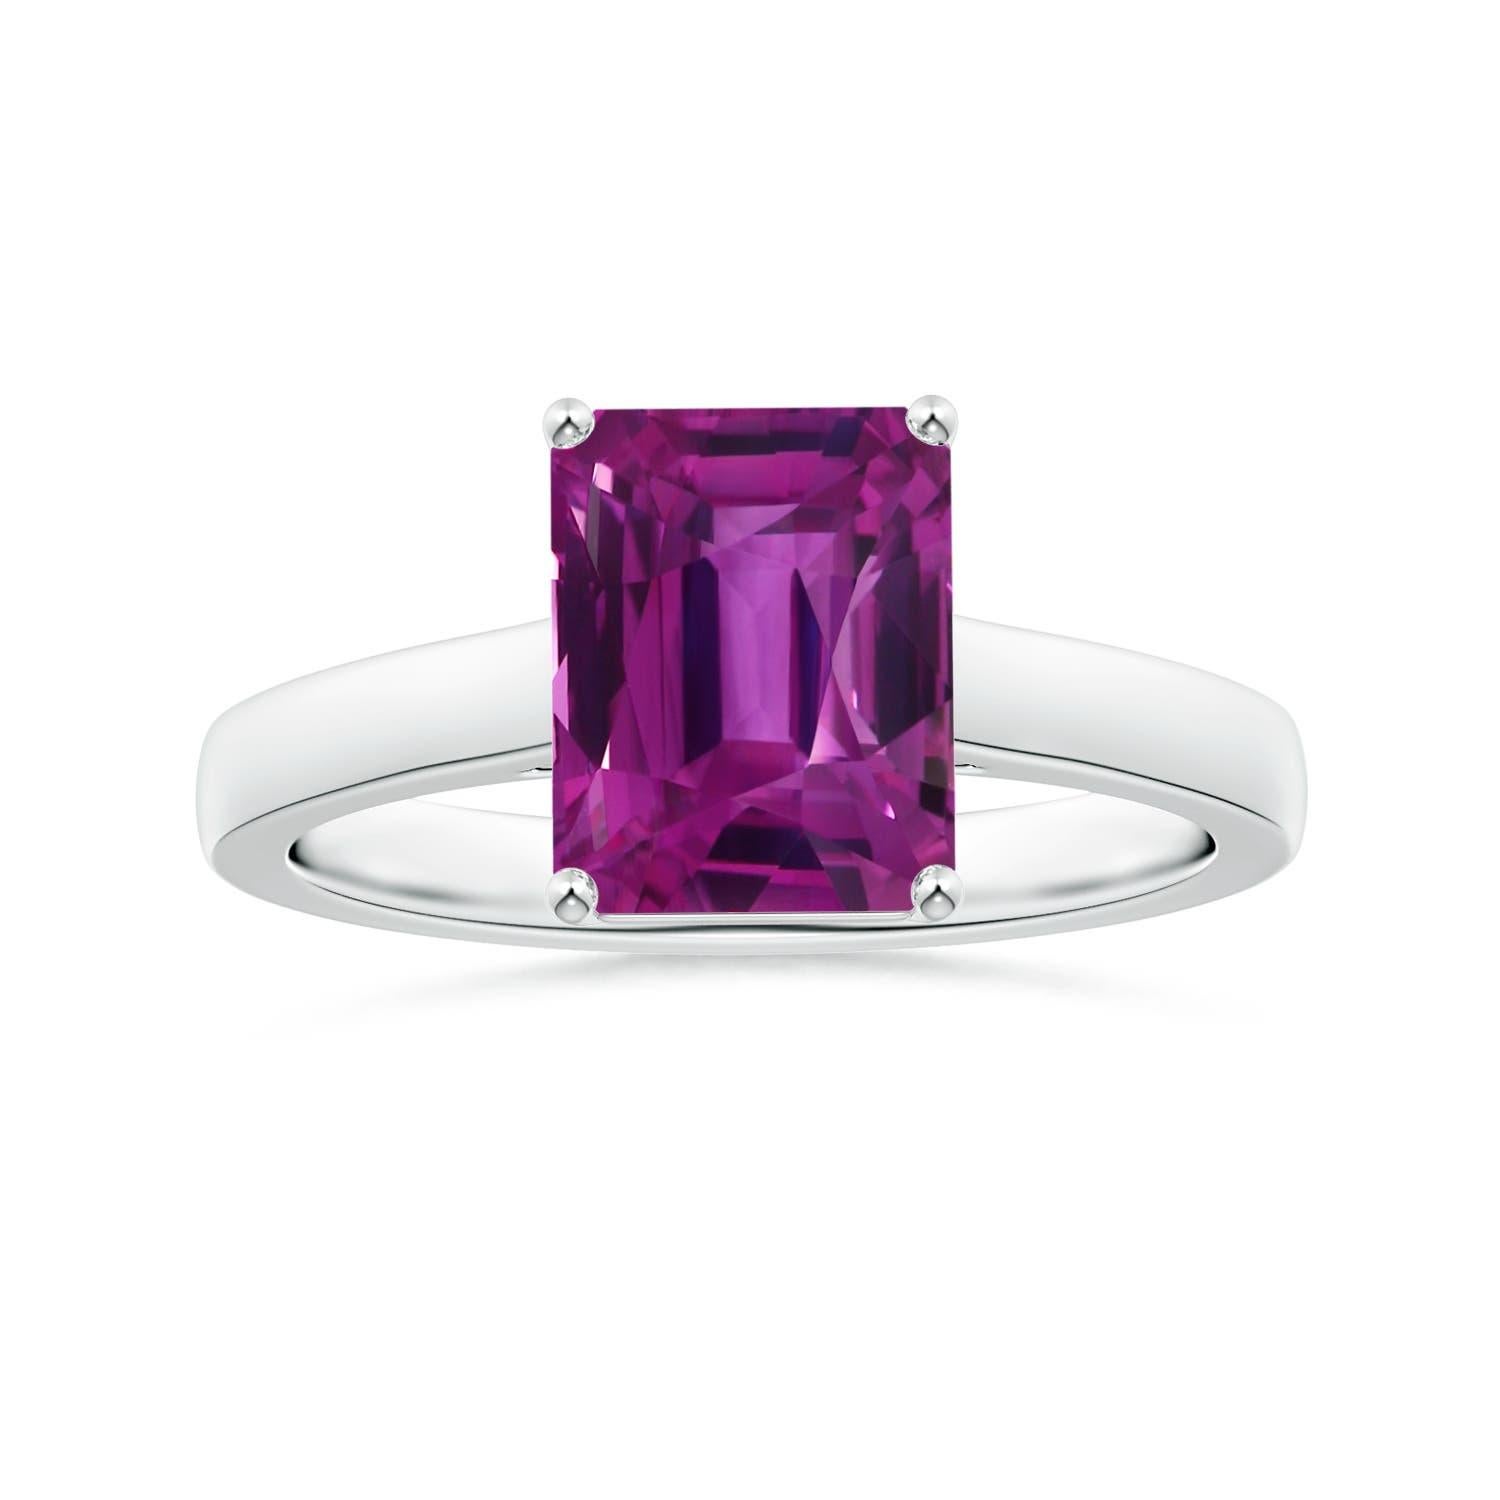 For Sale:  ANGARA GIA Certified Emerald-Cut Pink Sapphire Solitaire Ring in White Gold